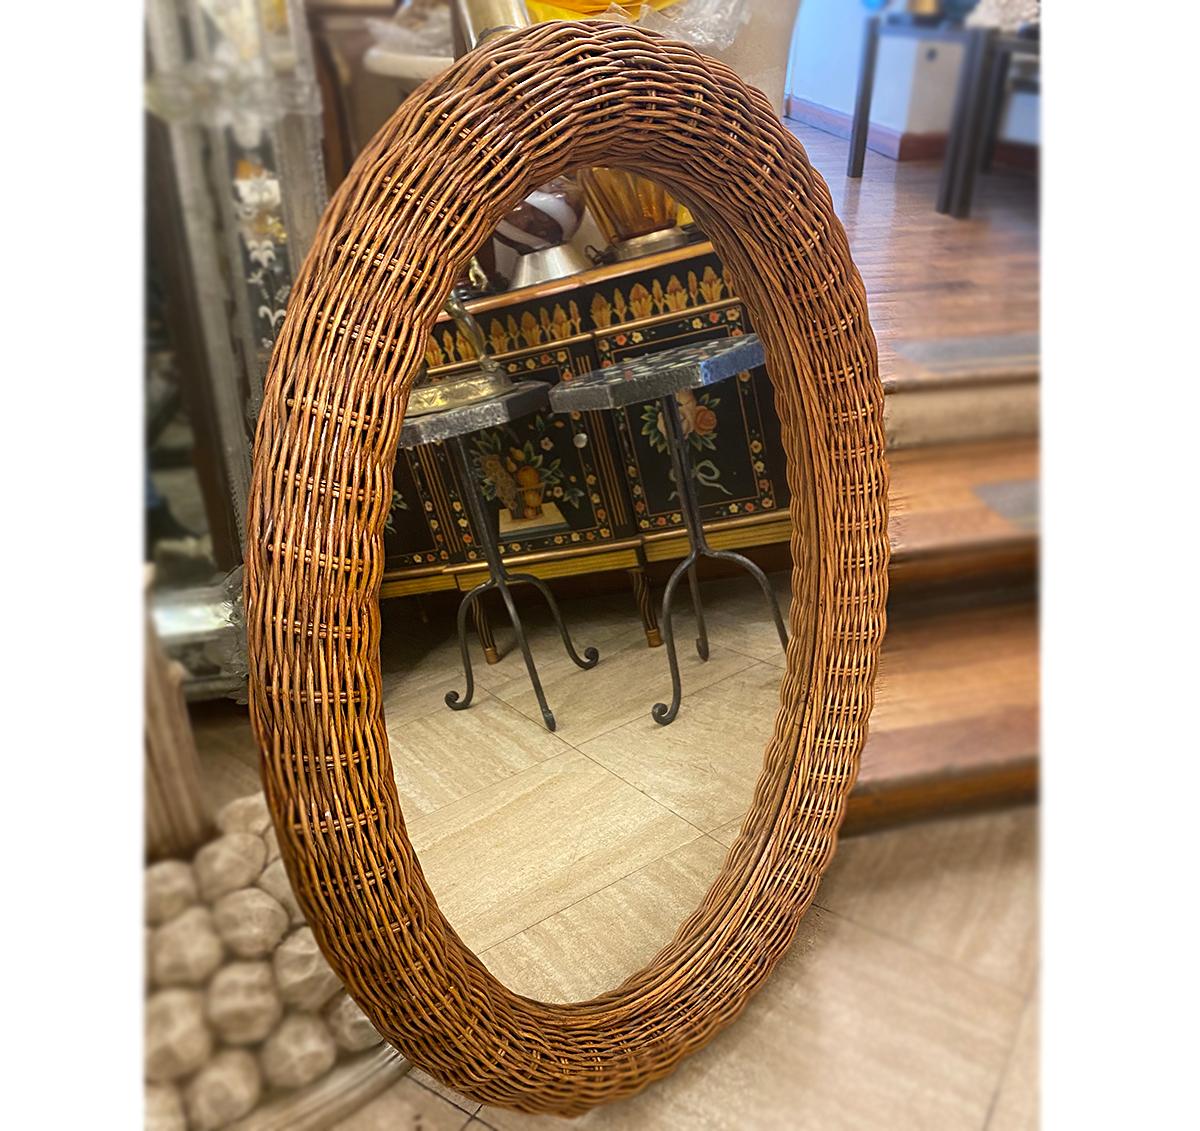 An English circa 1970's oval mirror with wicket frame.

Measurements:
Height: 39